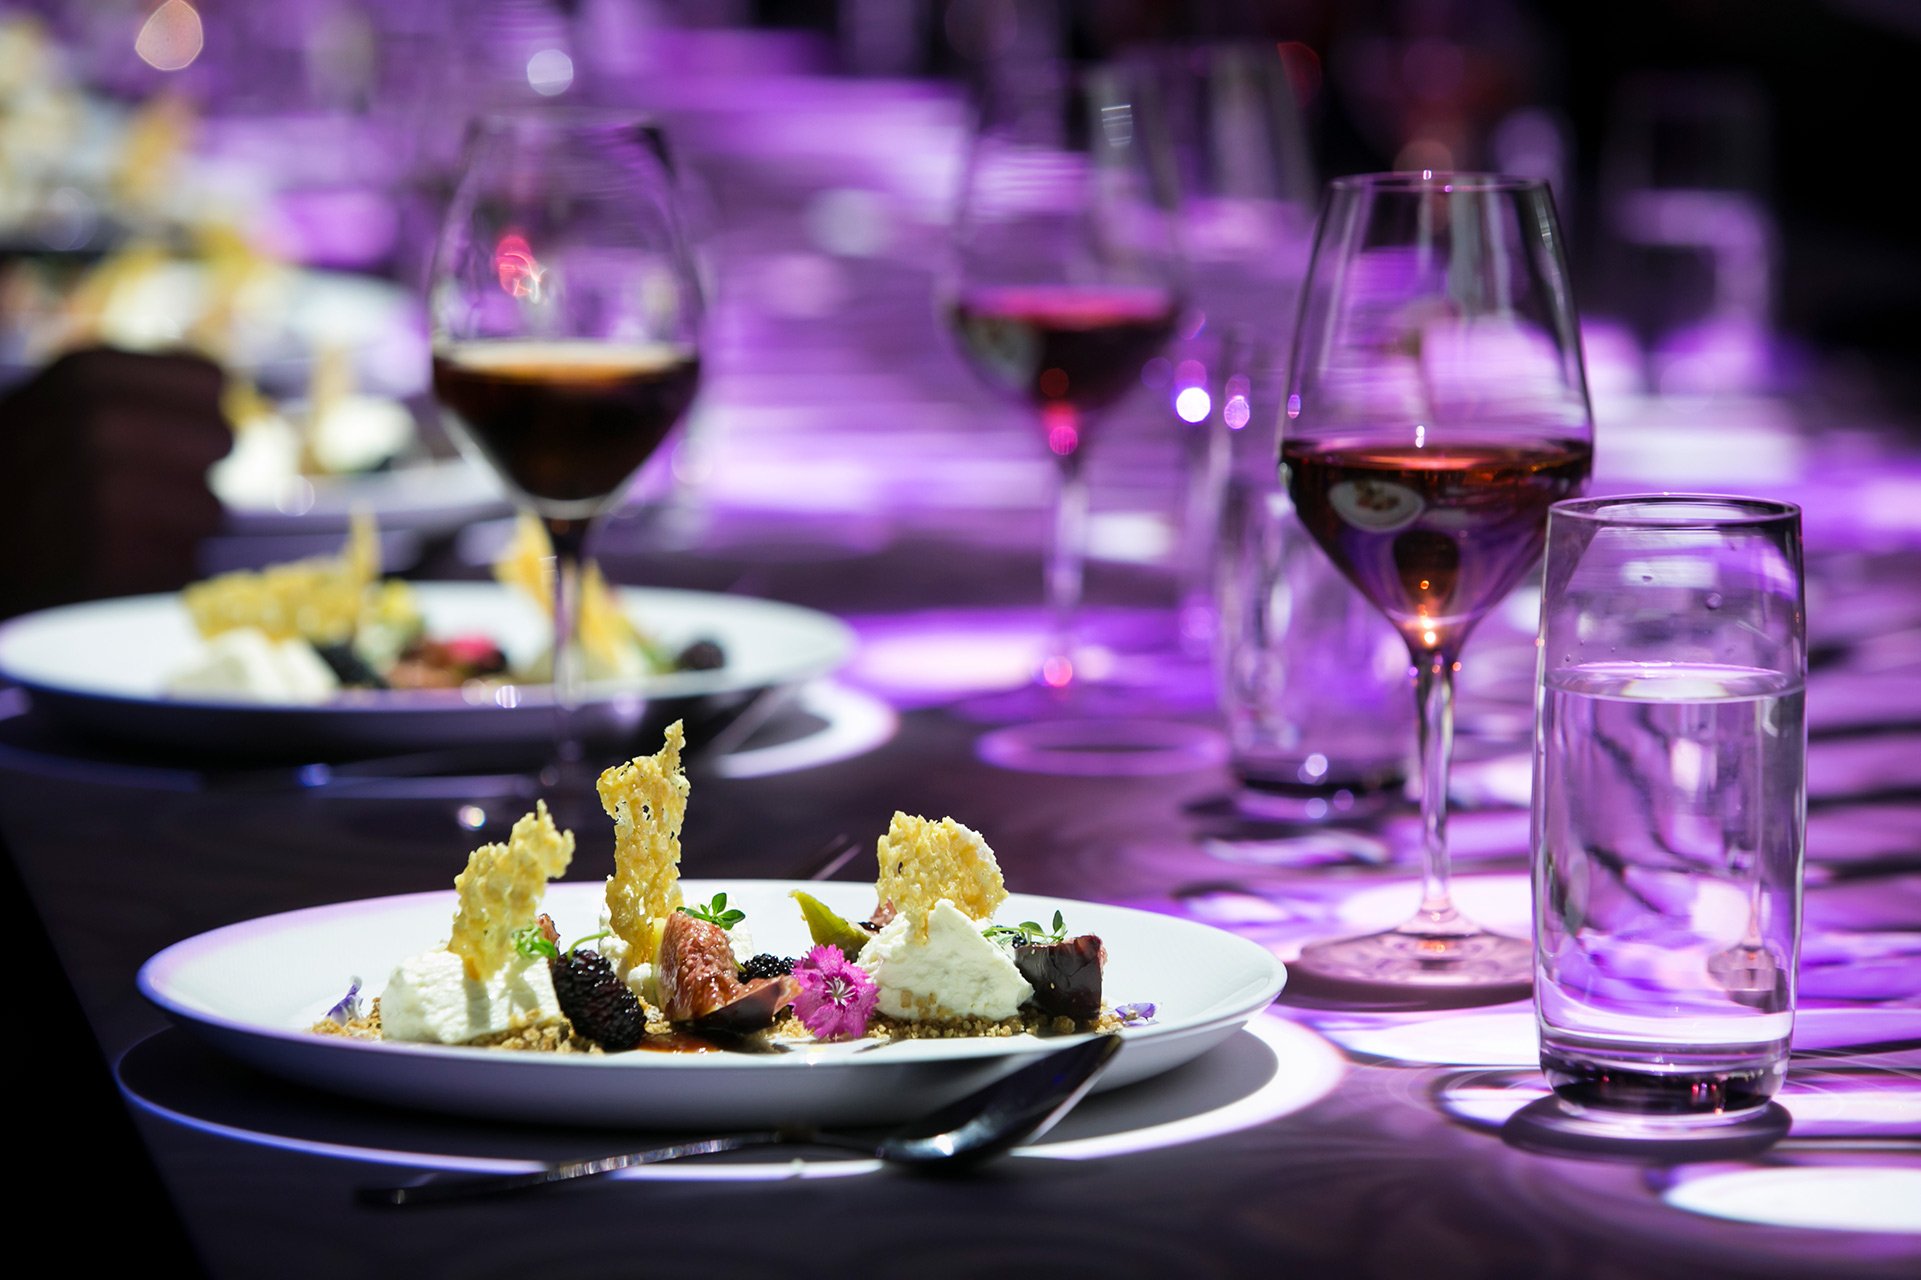  canapes and wine glasses on table brisbane kirsten cox photographer events 